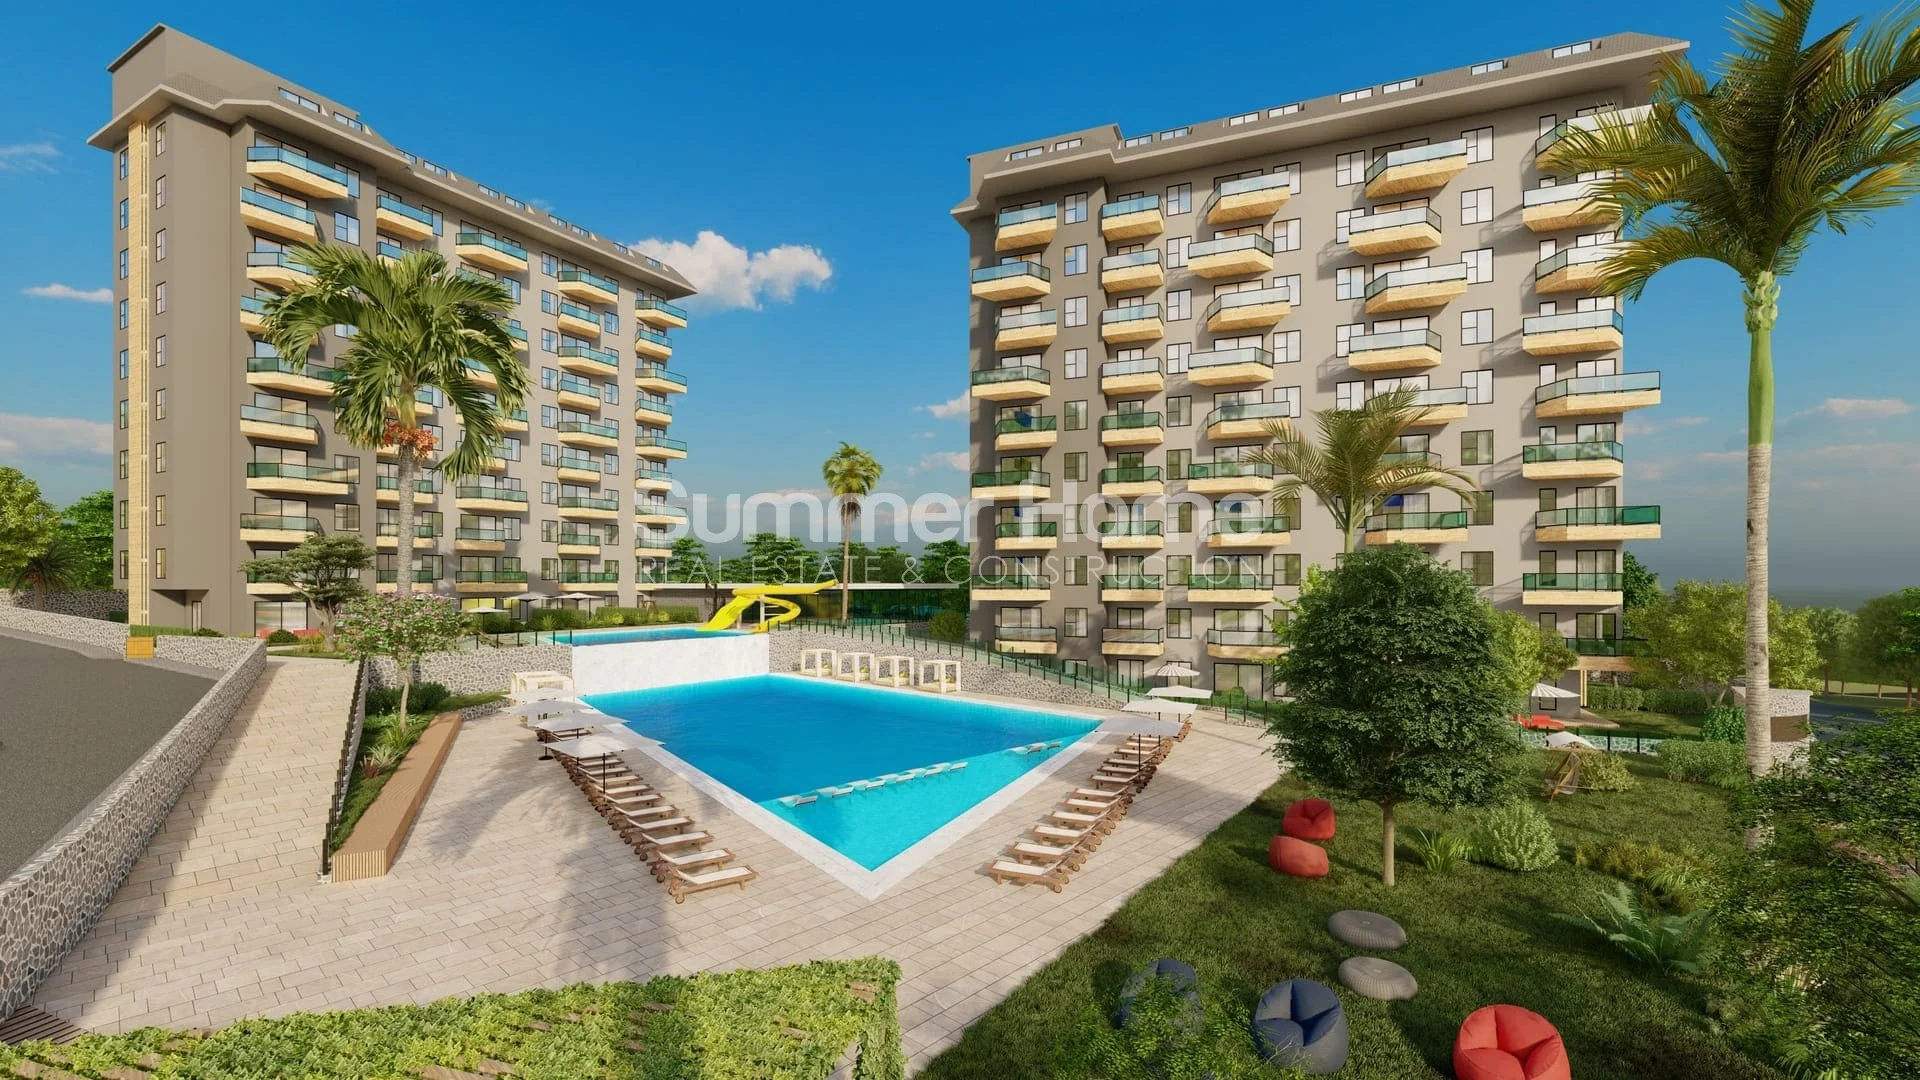 Gorgeous apartments for sale in Avsallar General - 6